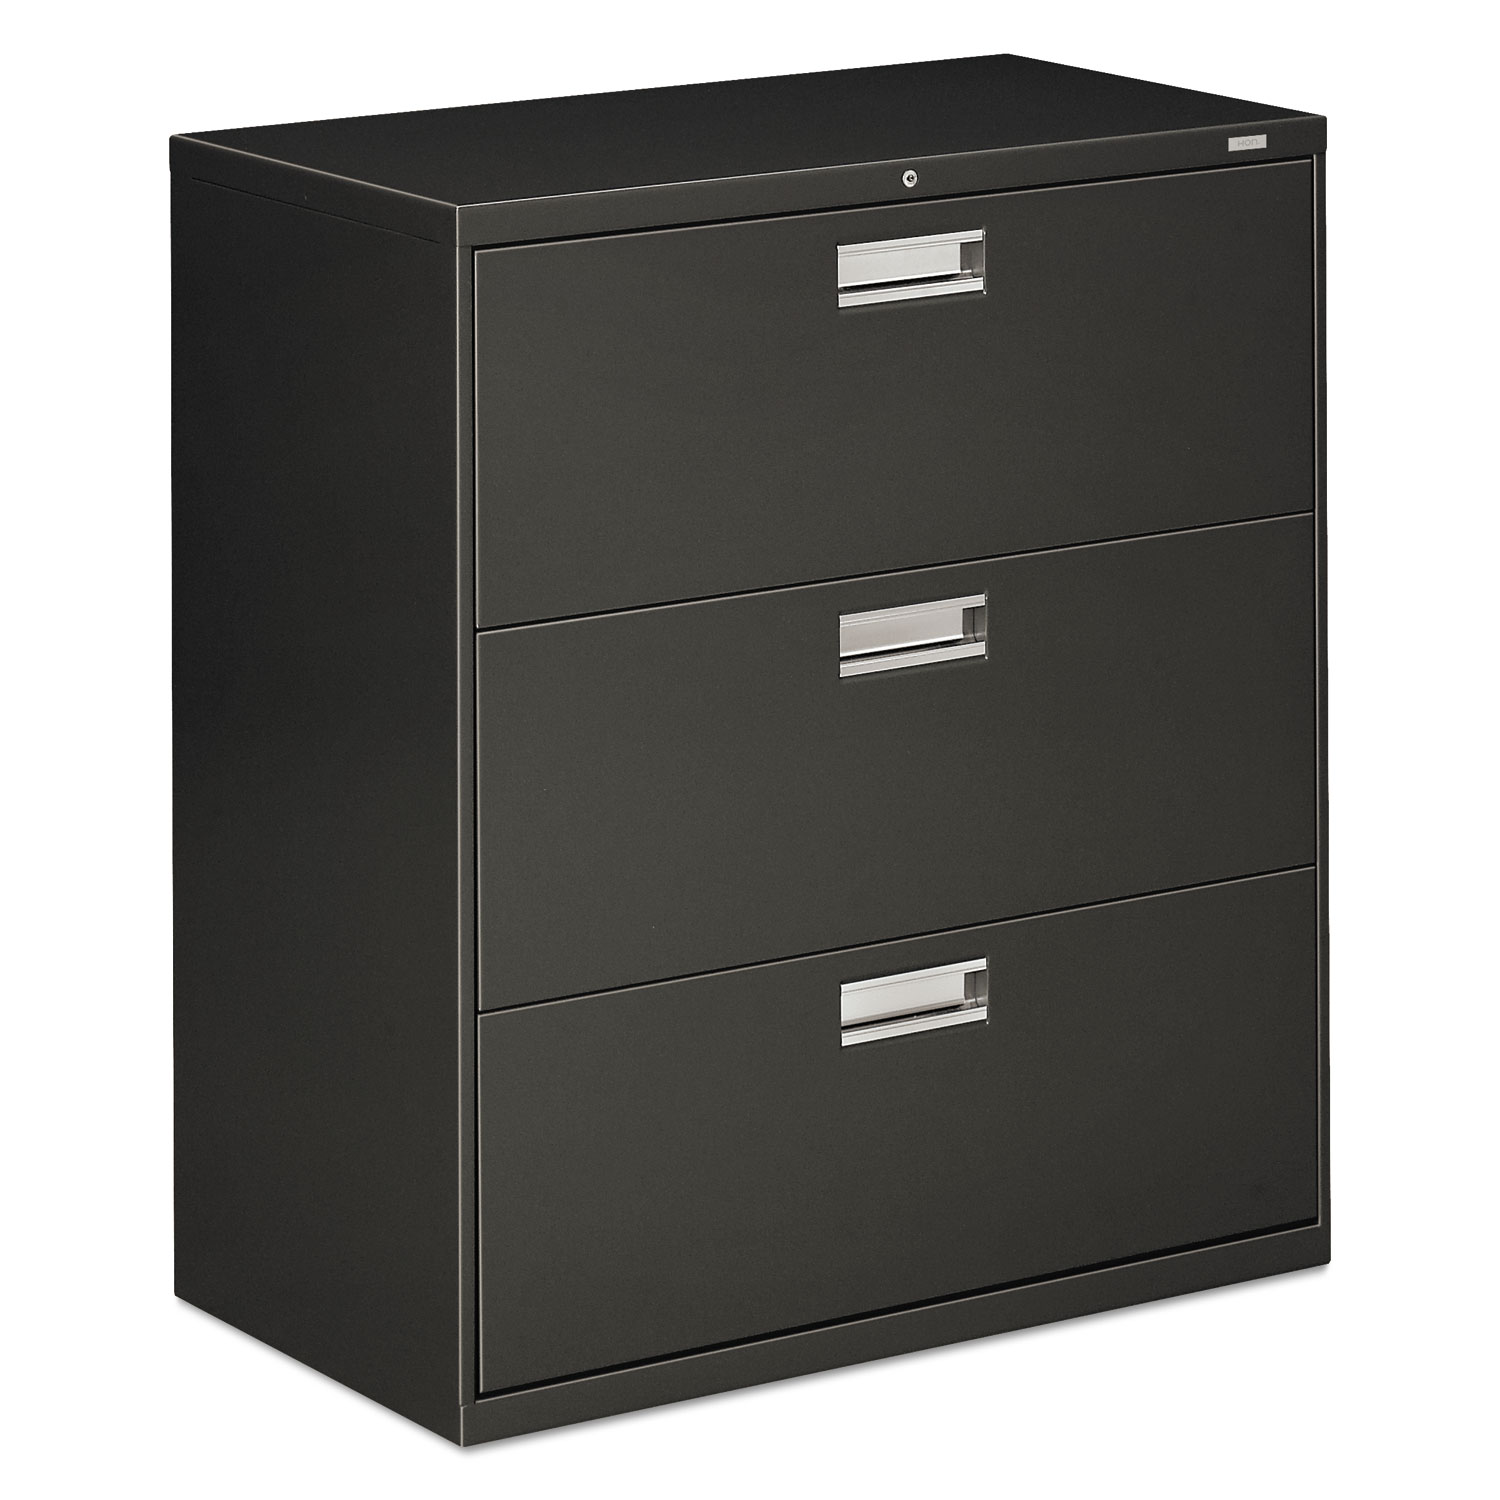 600 Series Three-Drawer Lateral File, 36w x 18d x 39 1/8h, Charcoal